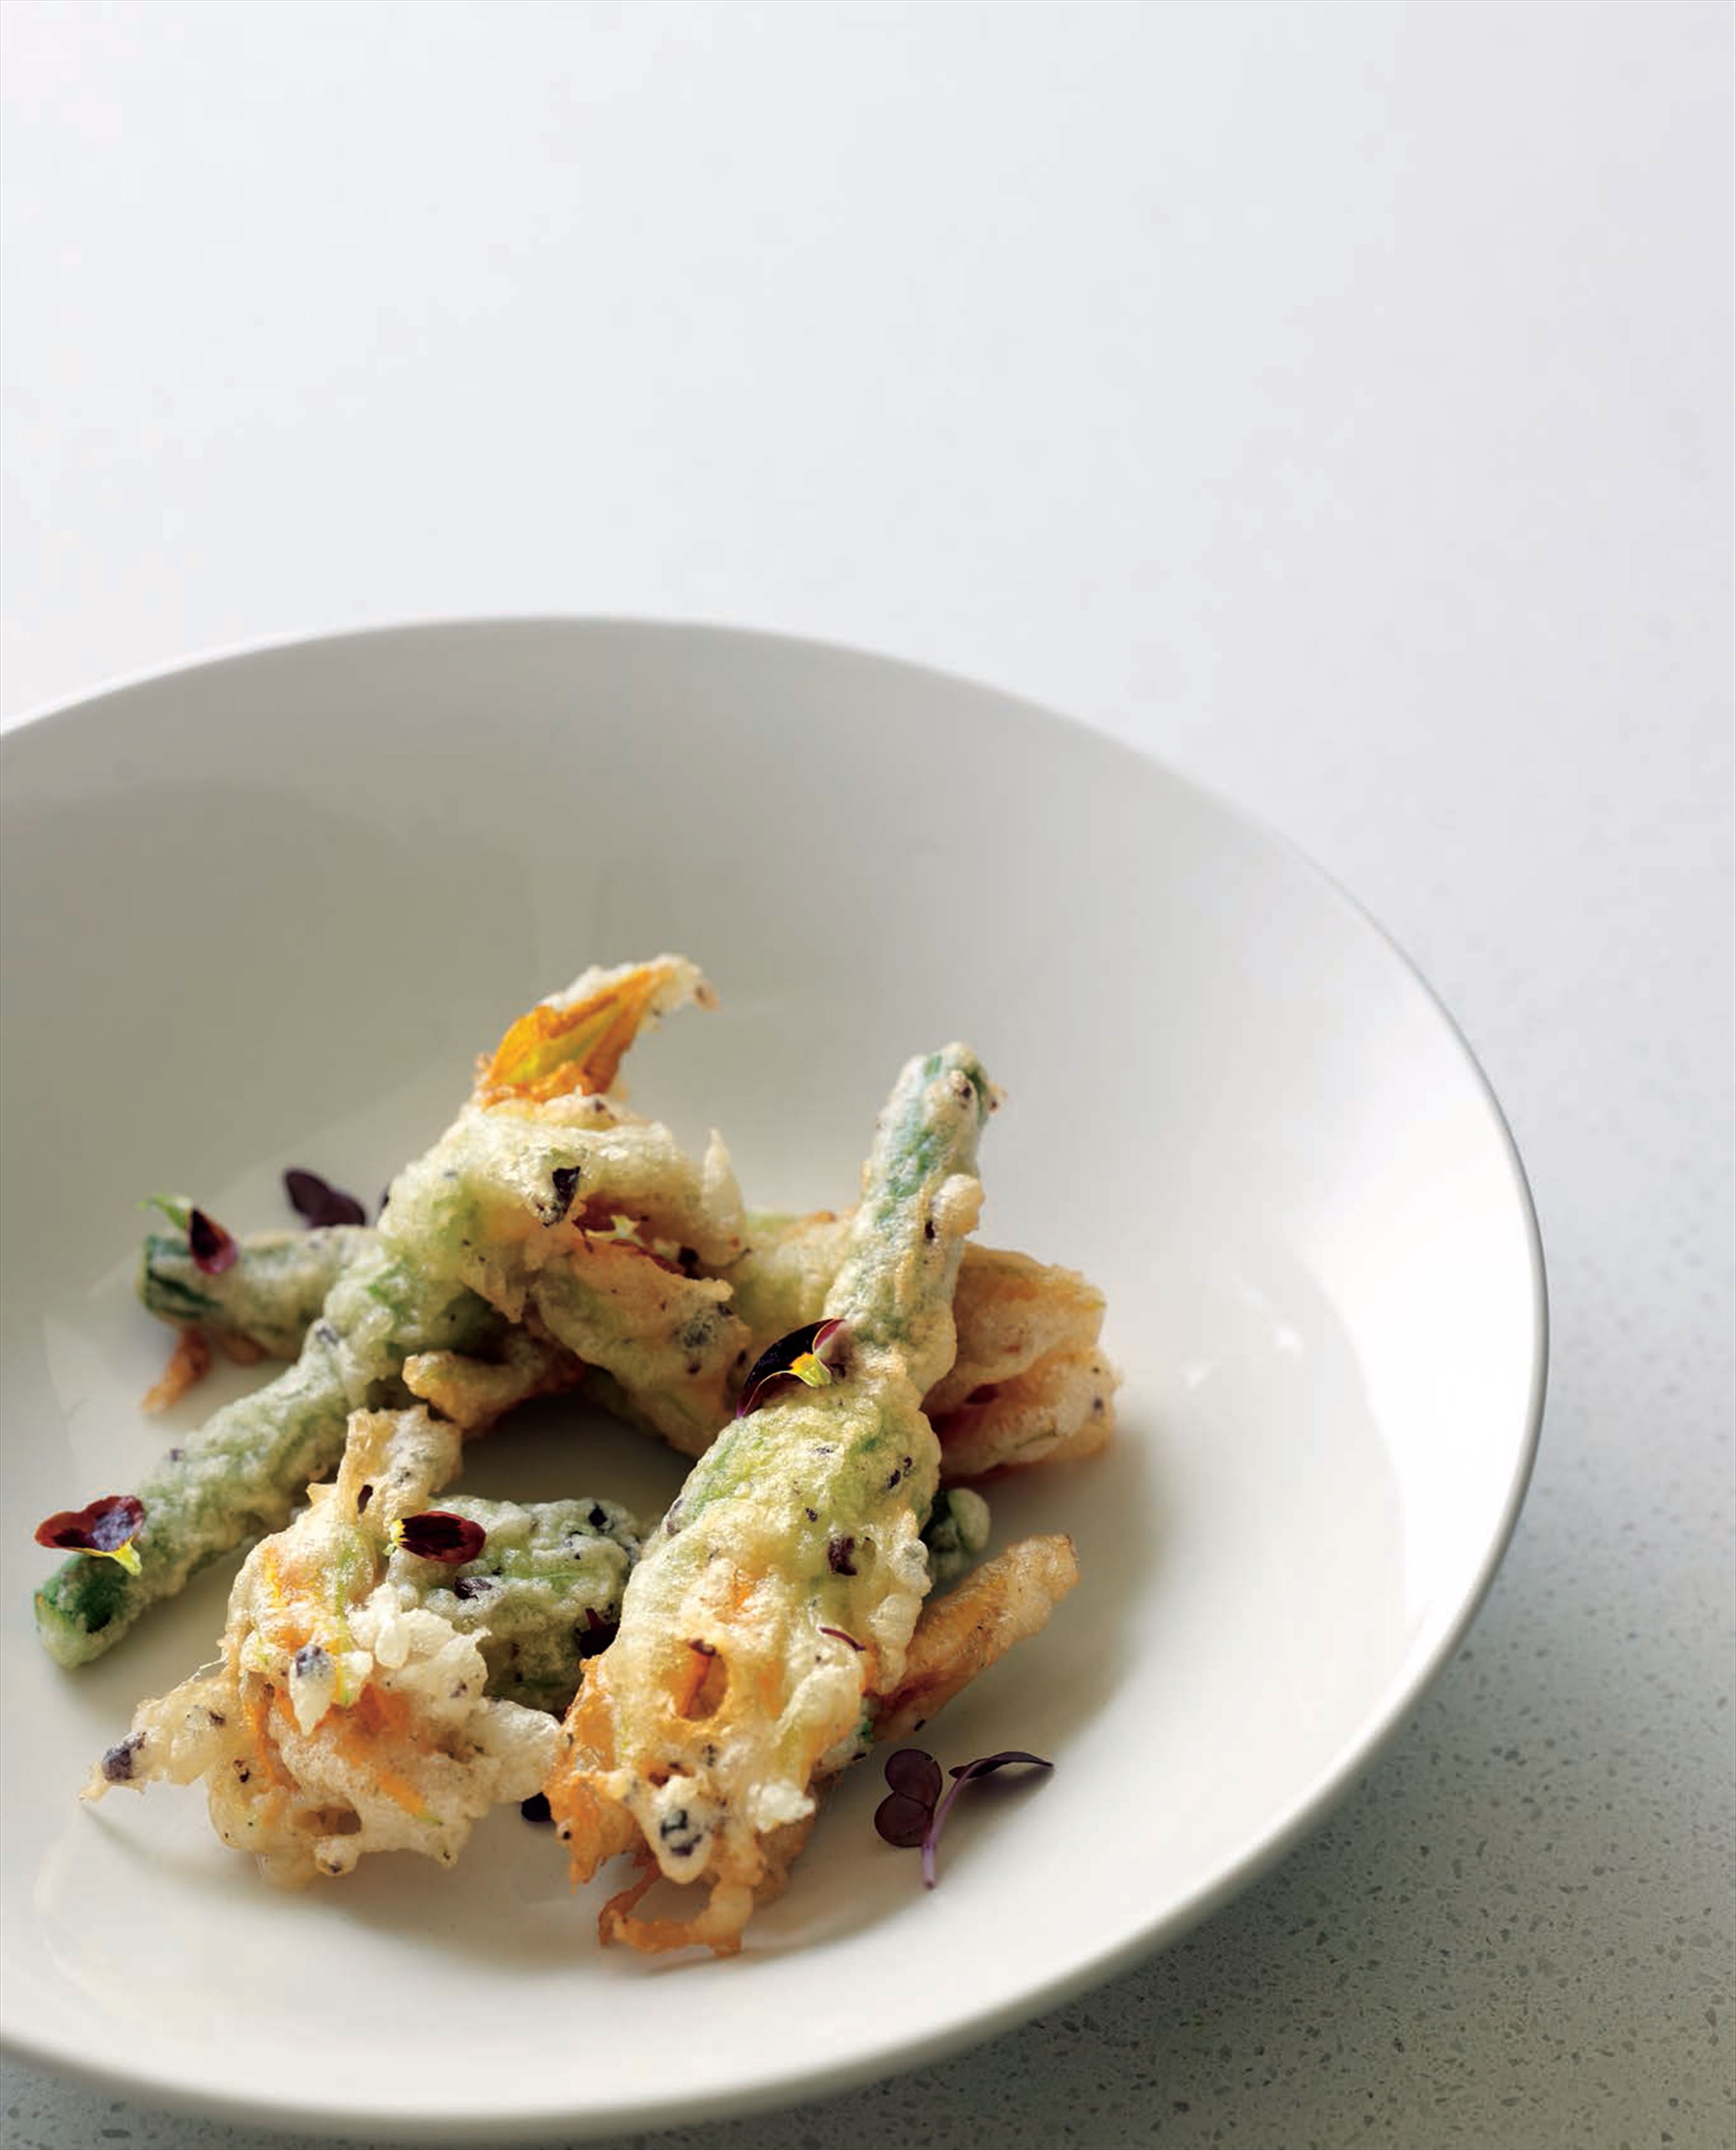 Crunchy zucchini flowers stuffed with haloumi, mint and ginger